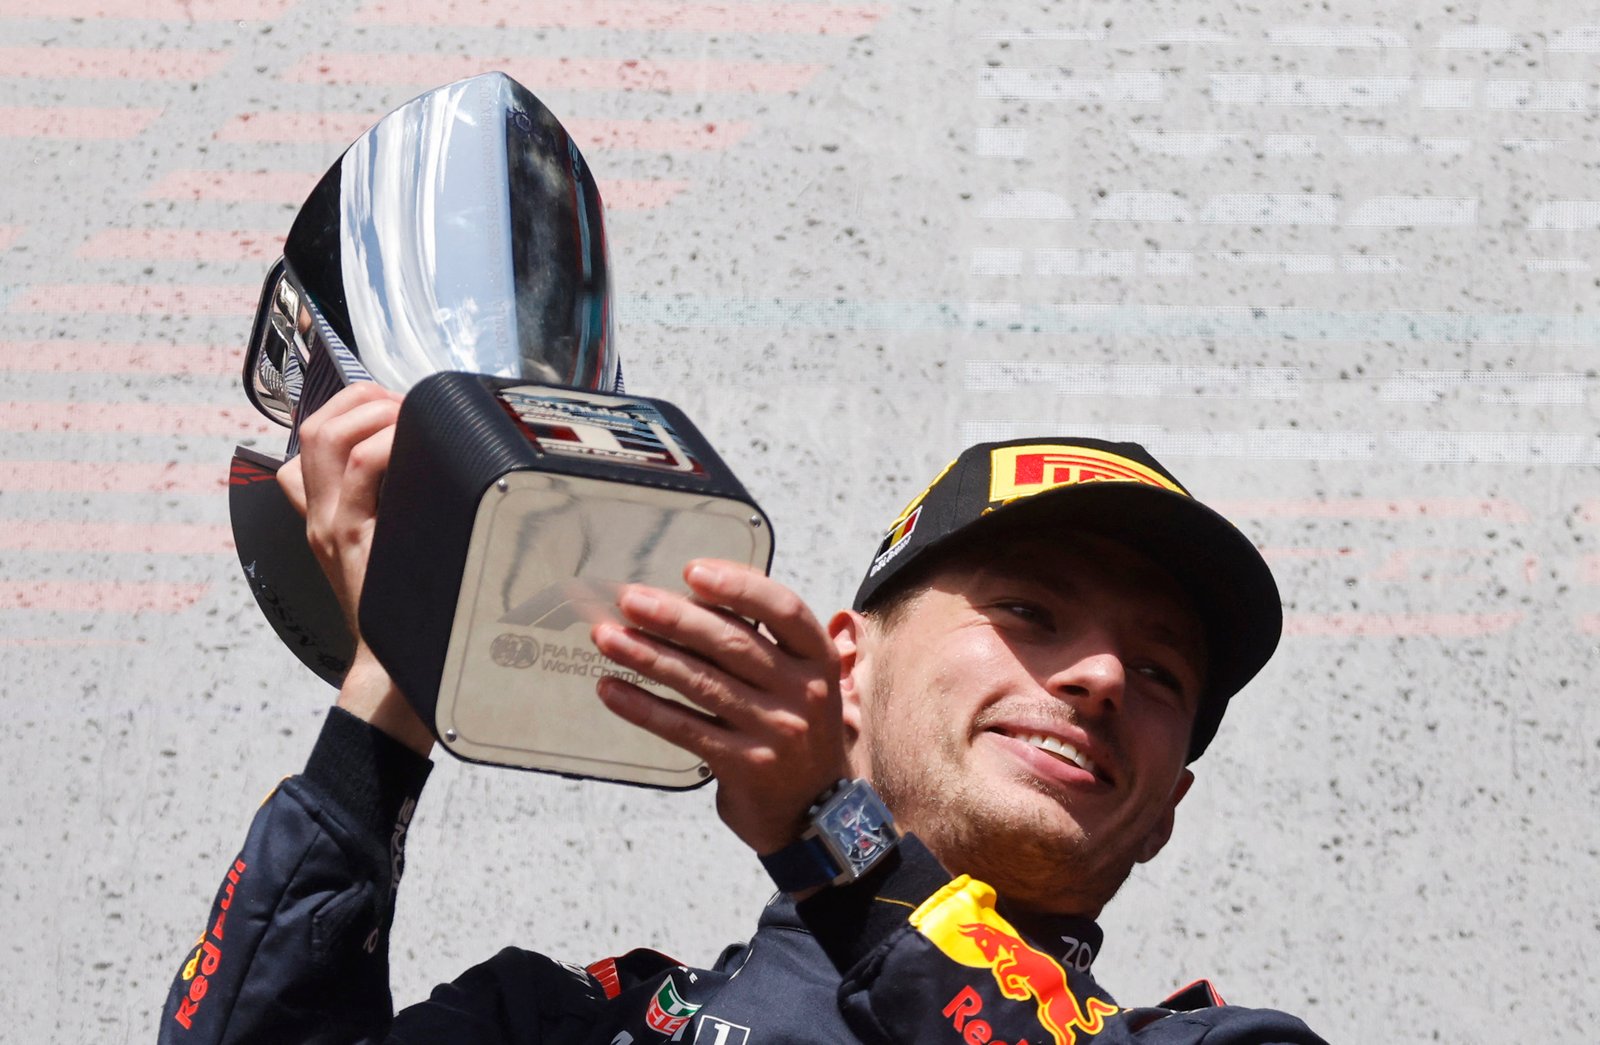 verstappen-wins-at-spa-in-crushing-eighth-in-a-row